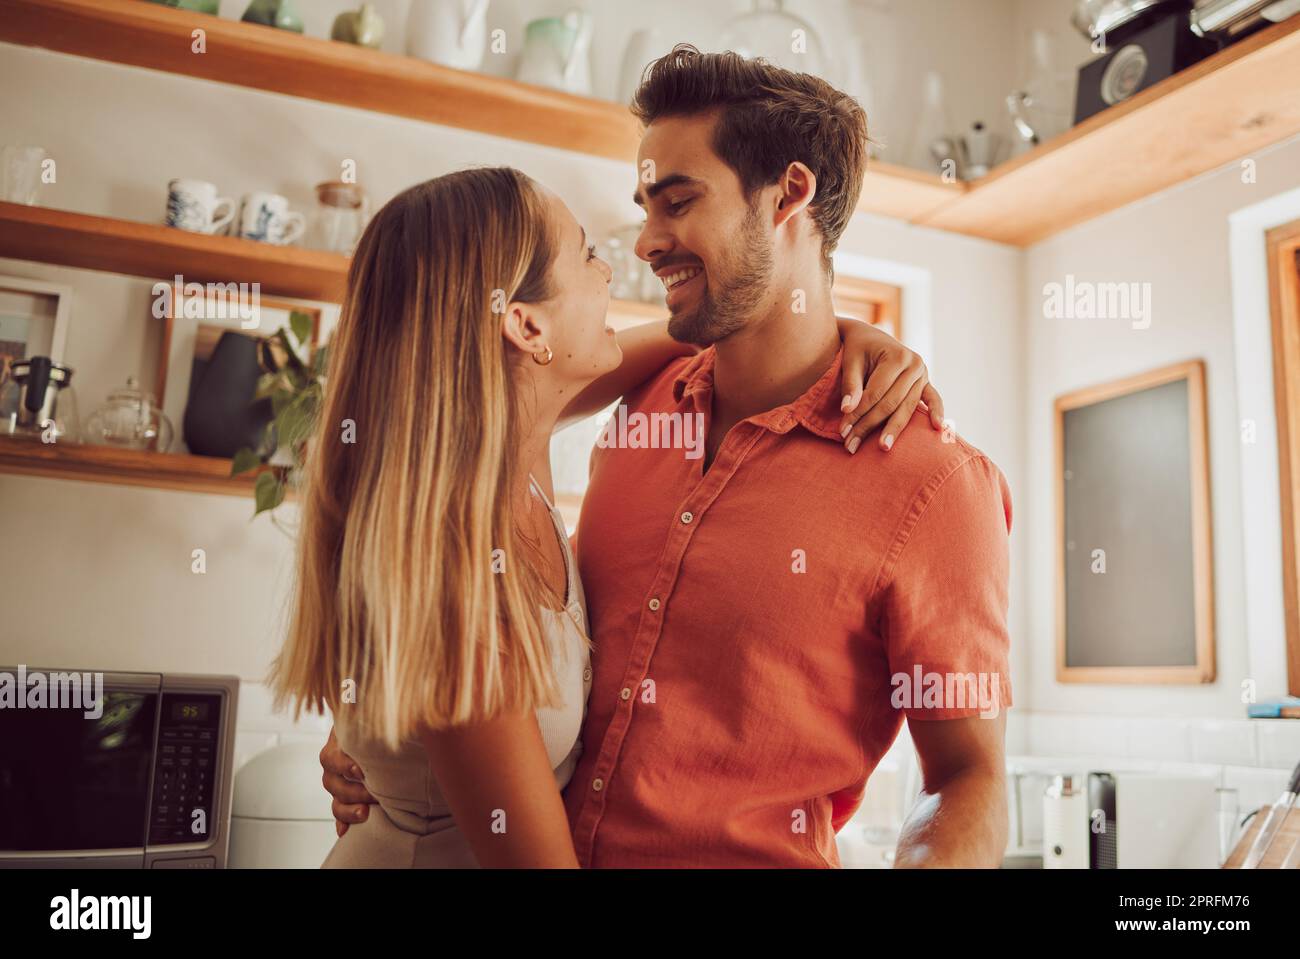 Romance, happy and love couple hugging, smile and bonding in kitchen. Romantic boyfriend and girlfriend embracing, enjoying their relationship and being carefree together. Stock Photo